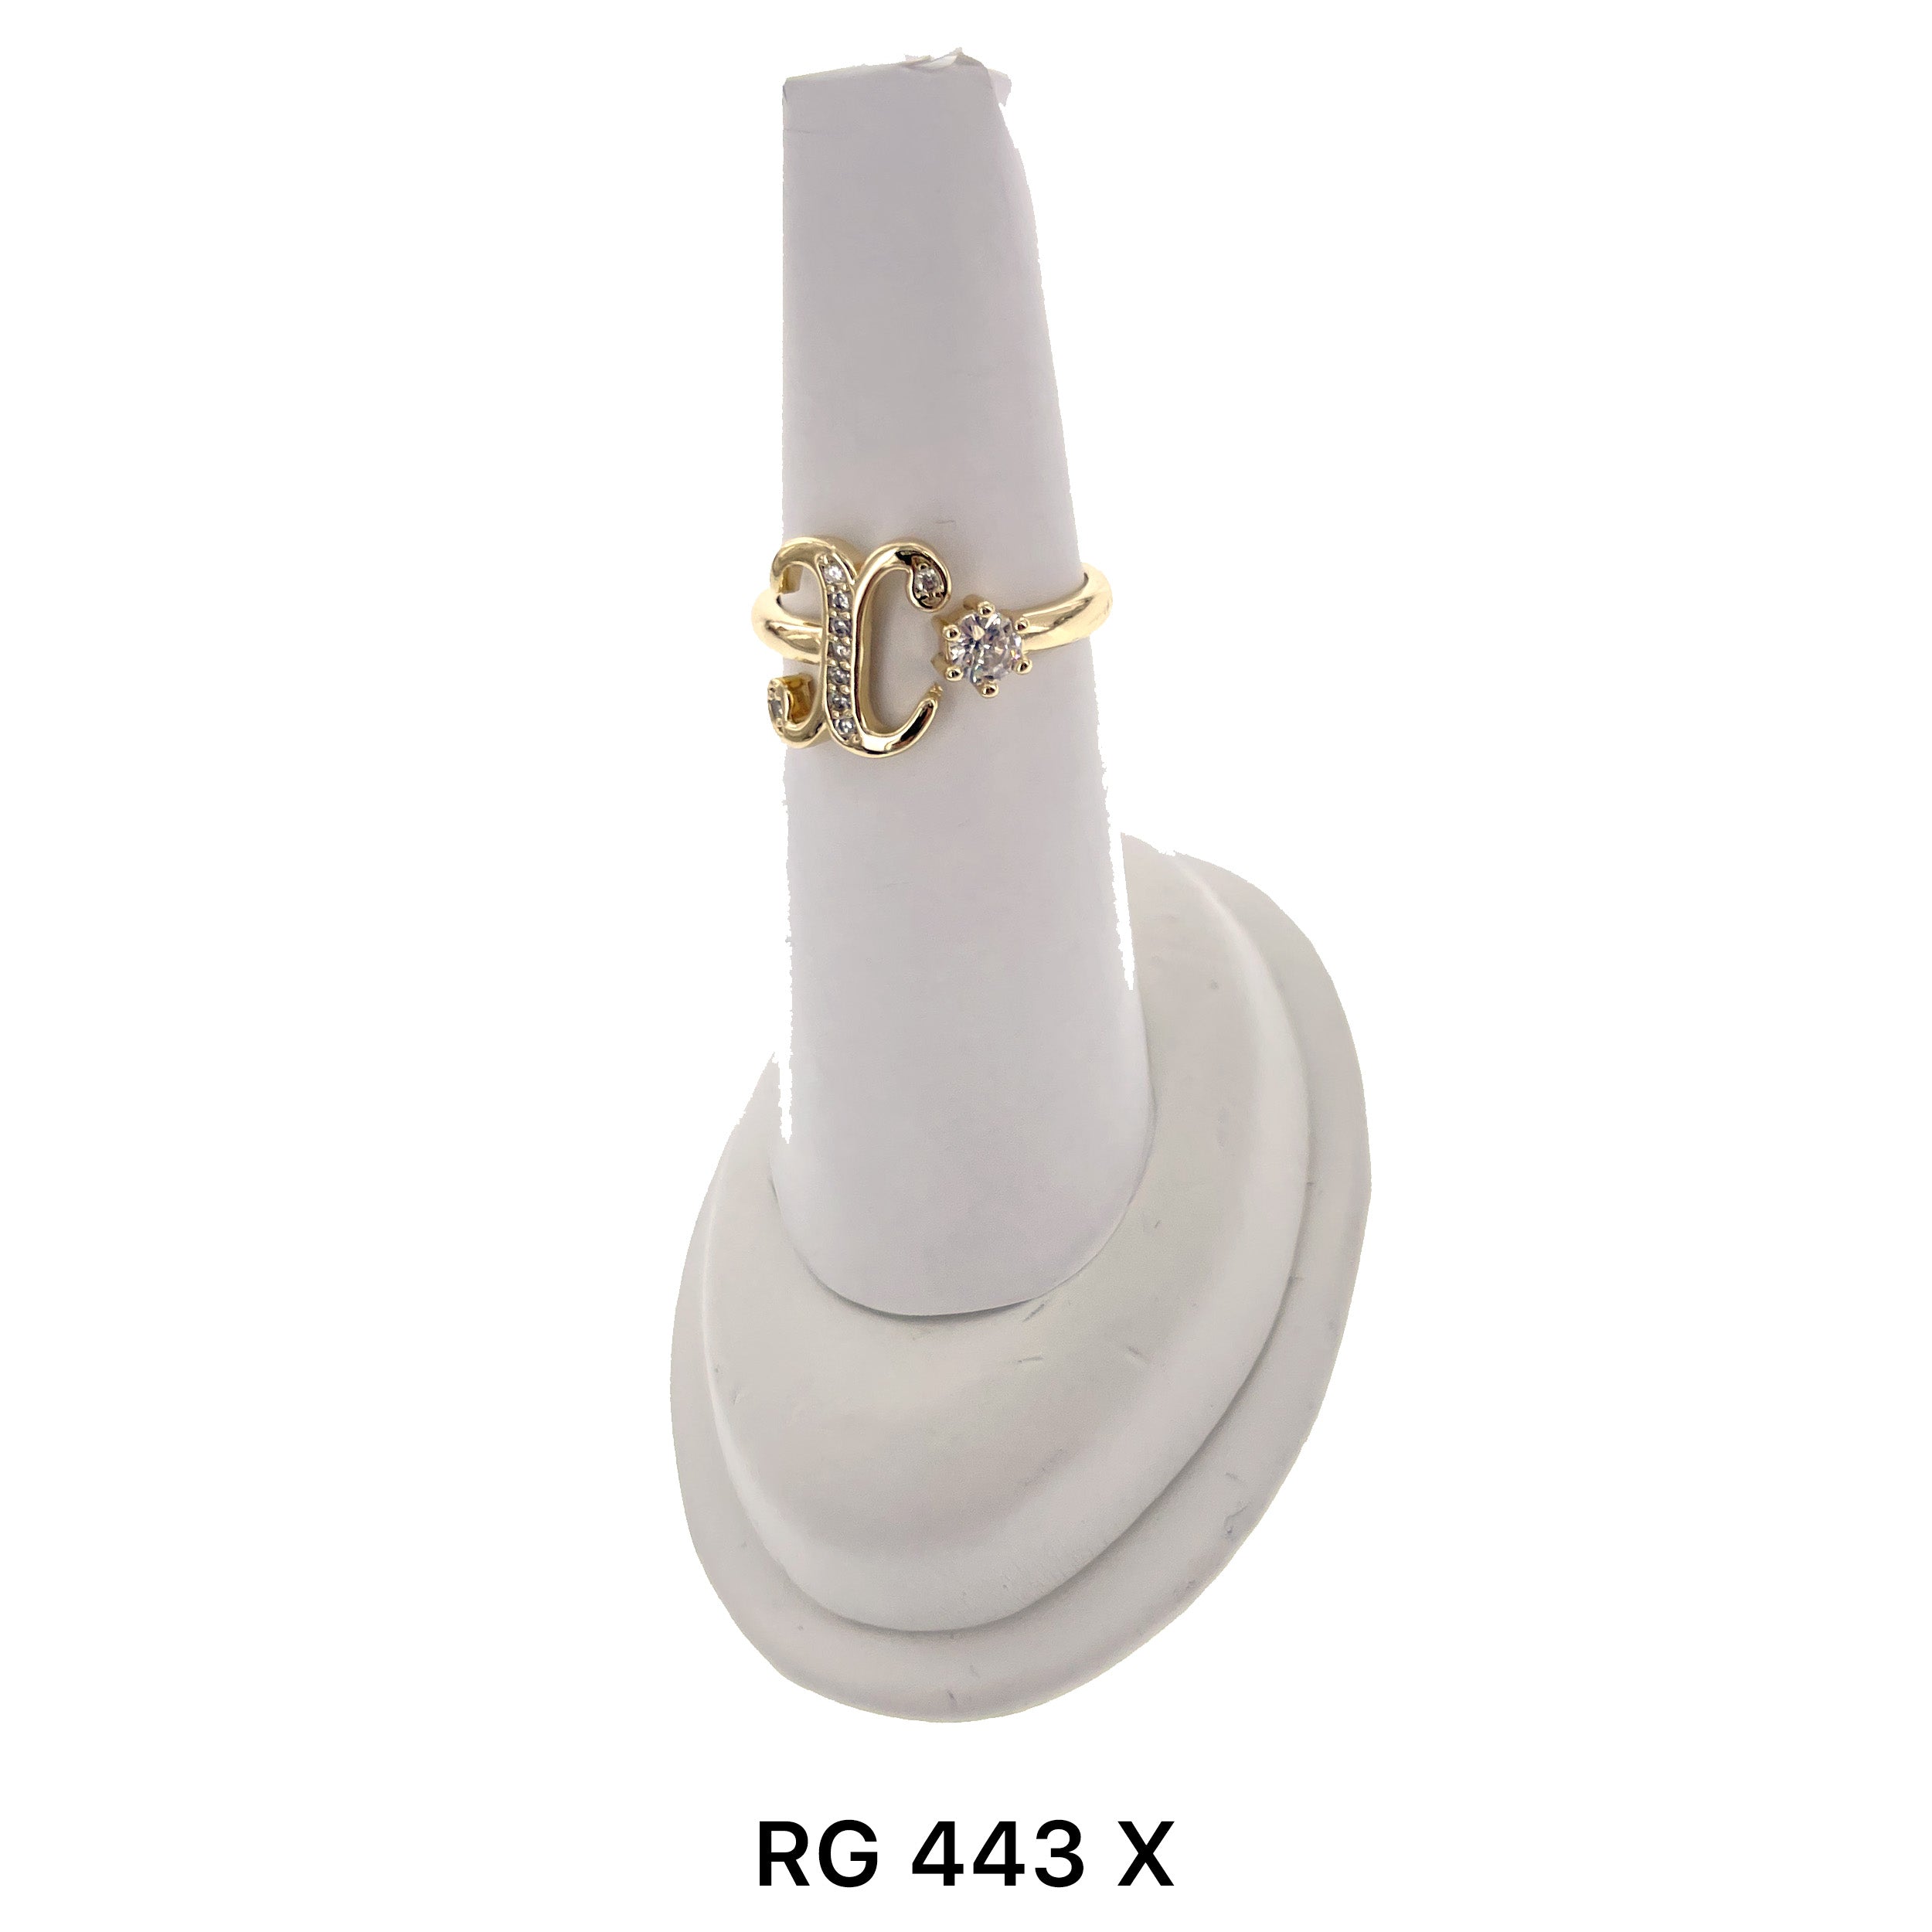 Initial Adjustable Ring RG 443 X